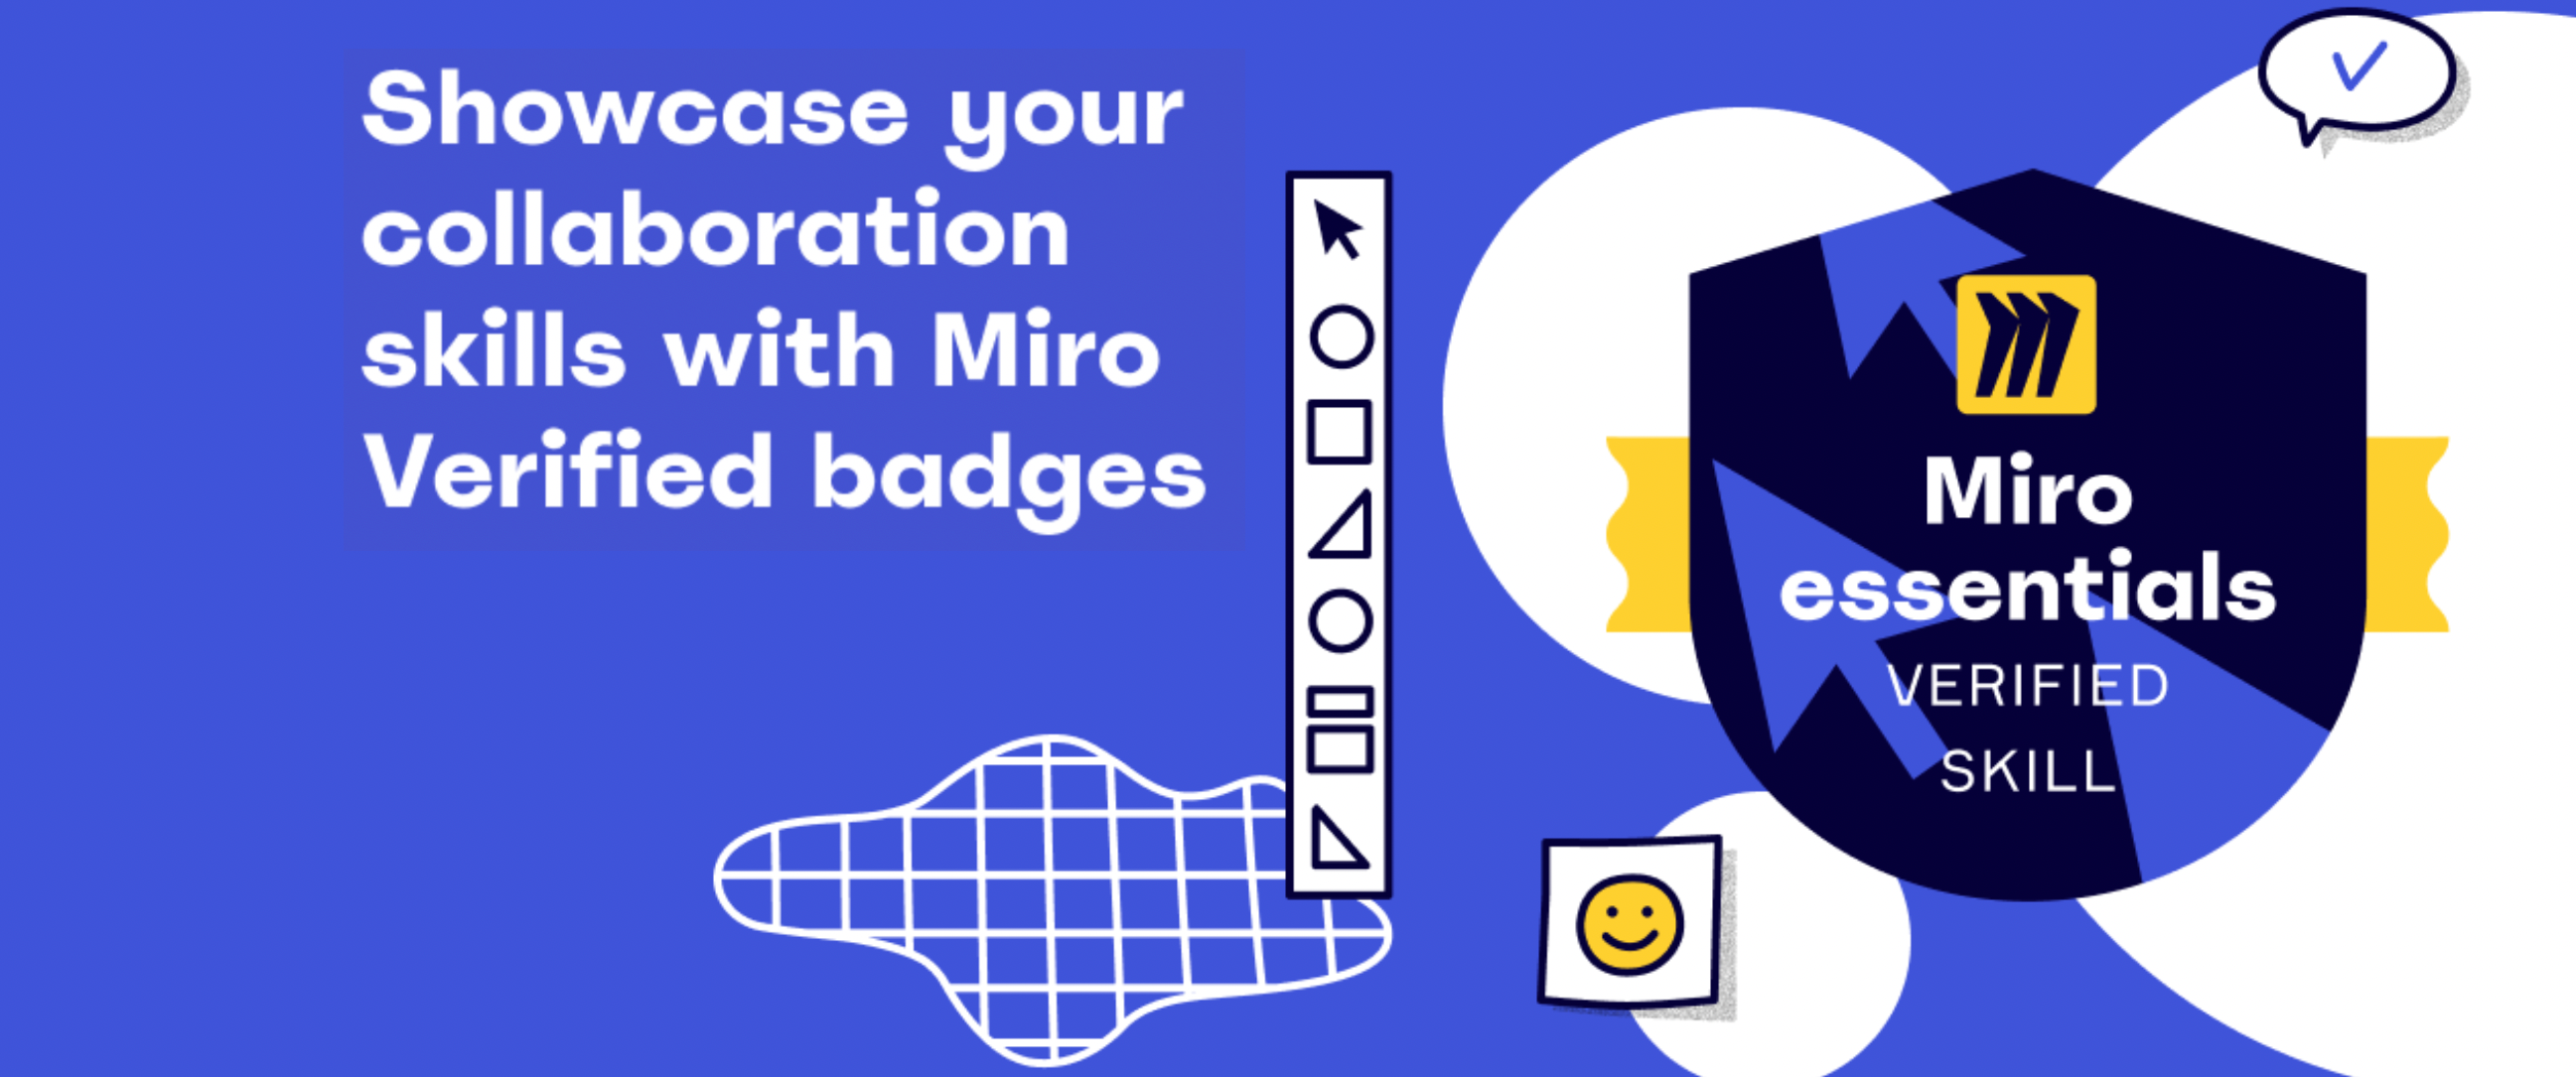 Announcing a new offering, Miro Verified. Earn badges to showcase your Miro skills.